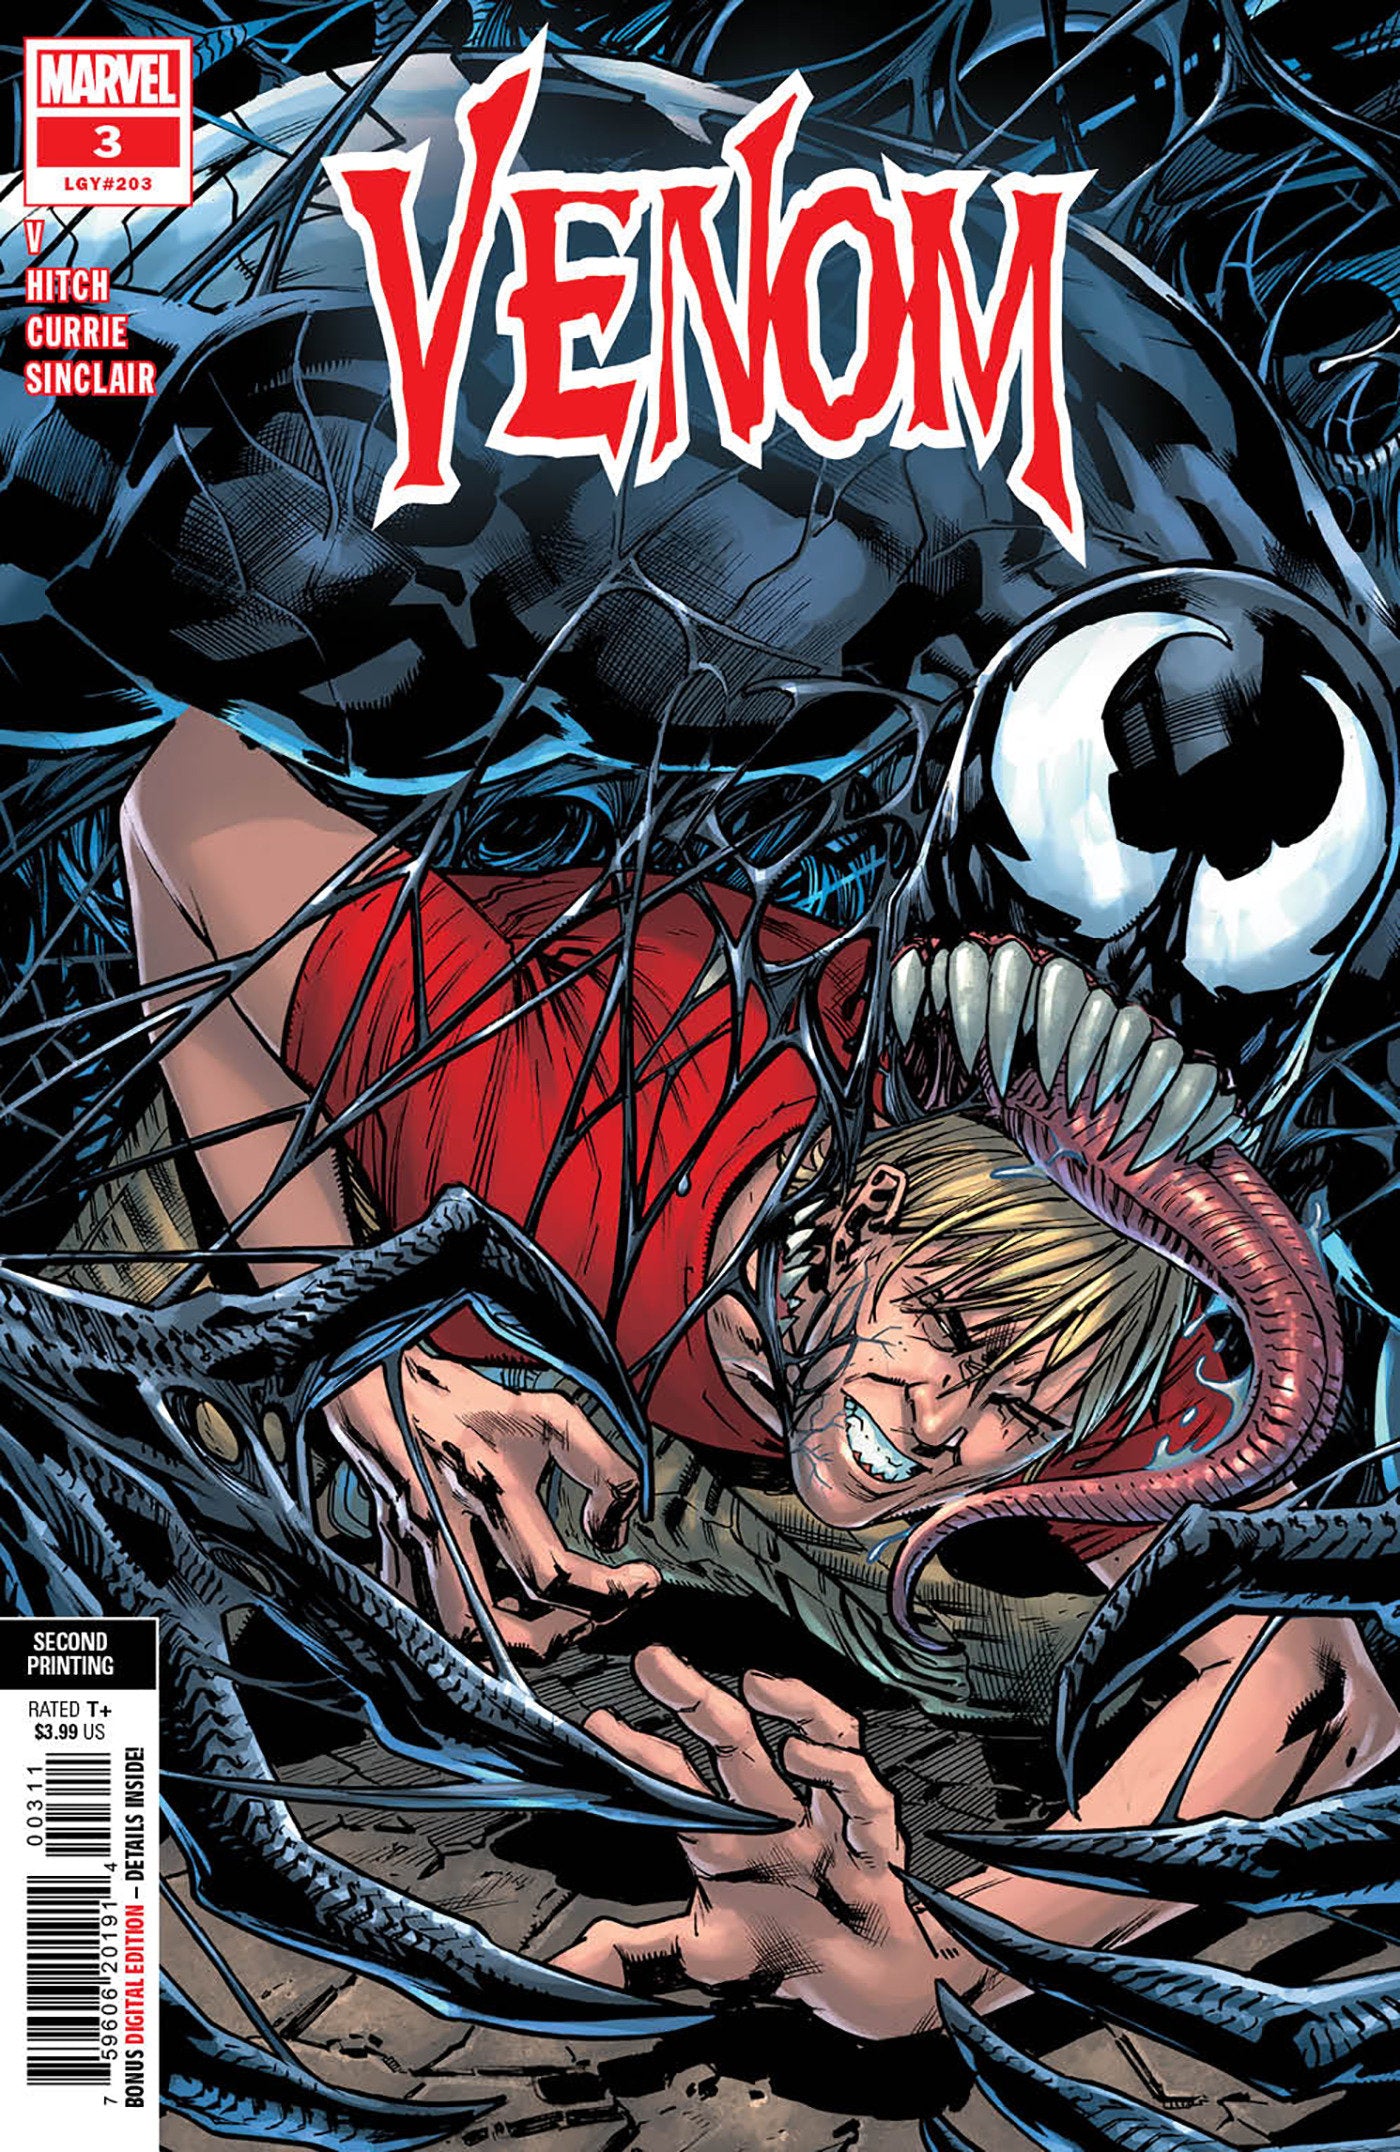 Image of Venom 3 Hitch 2nd Printing Variant comic sold by Stronghold Collectibles.